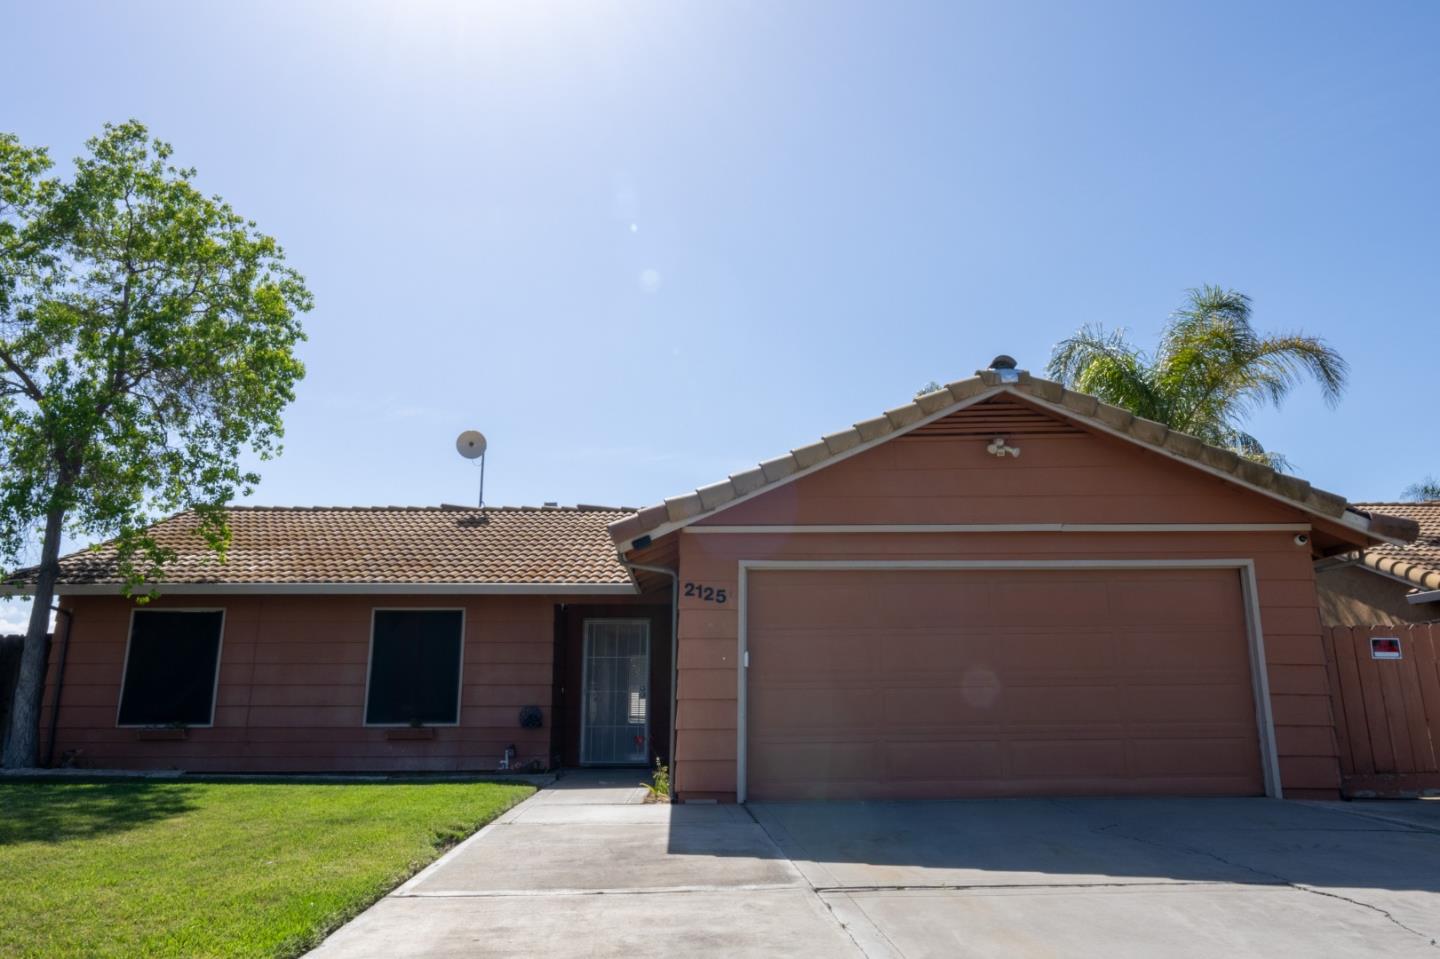 Photo of 2125 S 12th St in Los Banos, CA